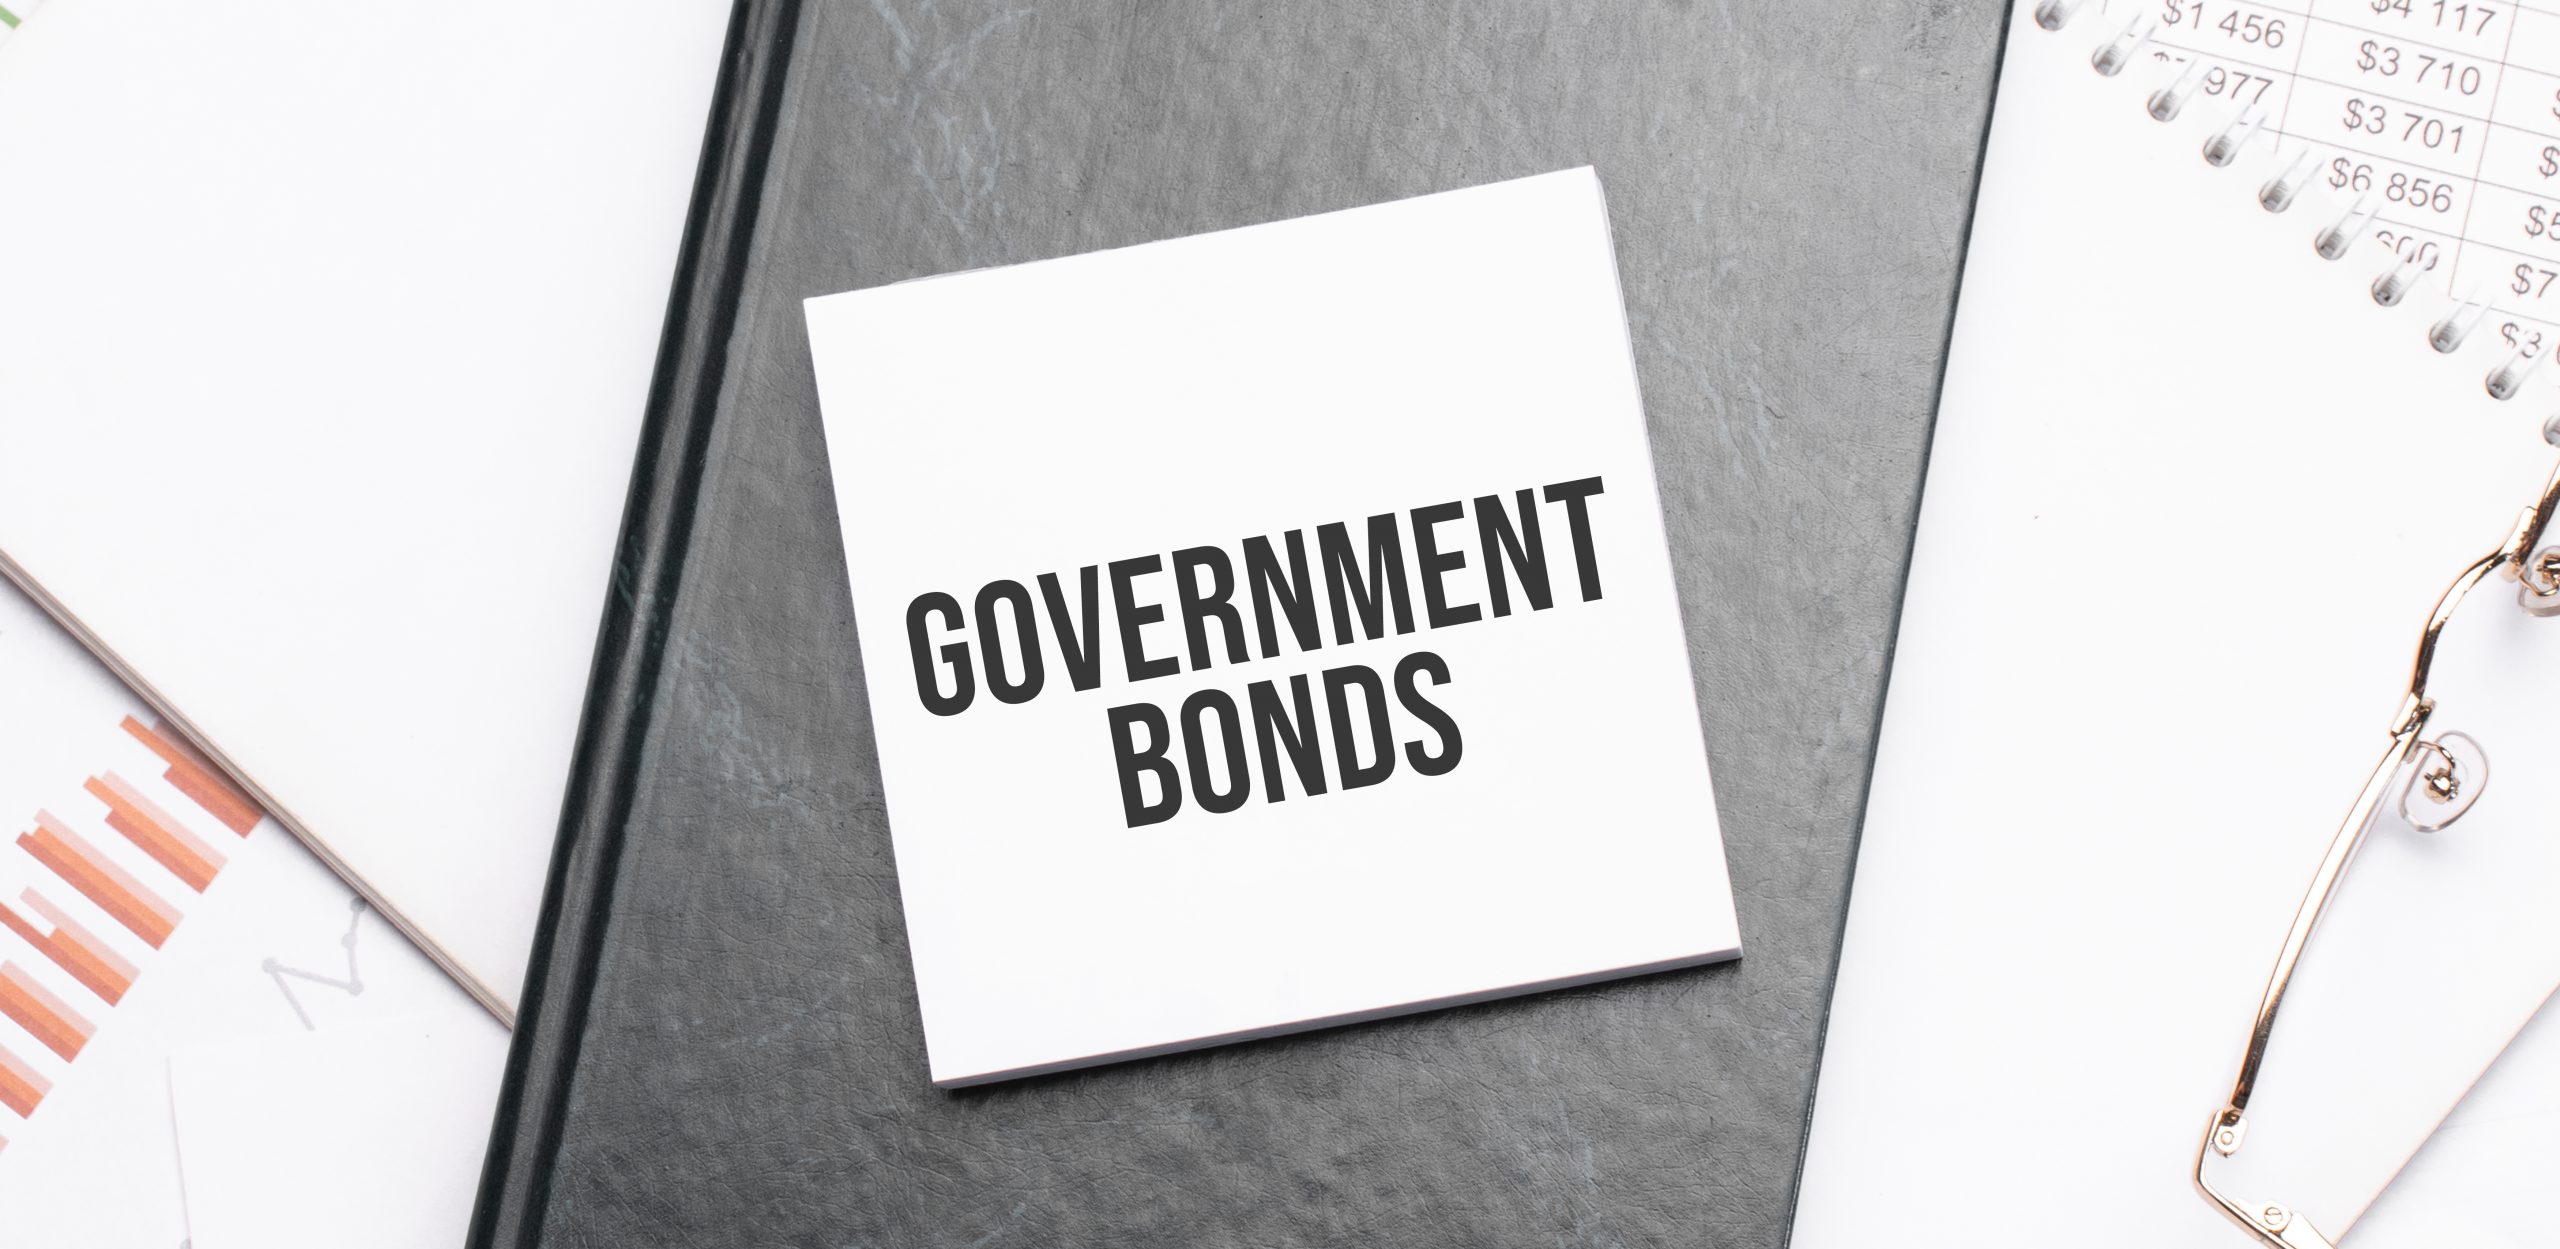 Things to Know Before Investing in Government Bonds